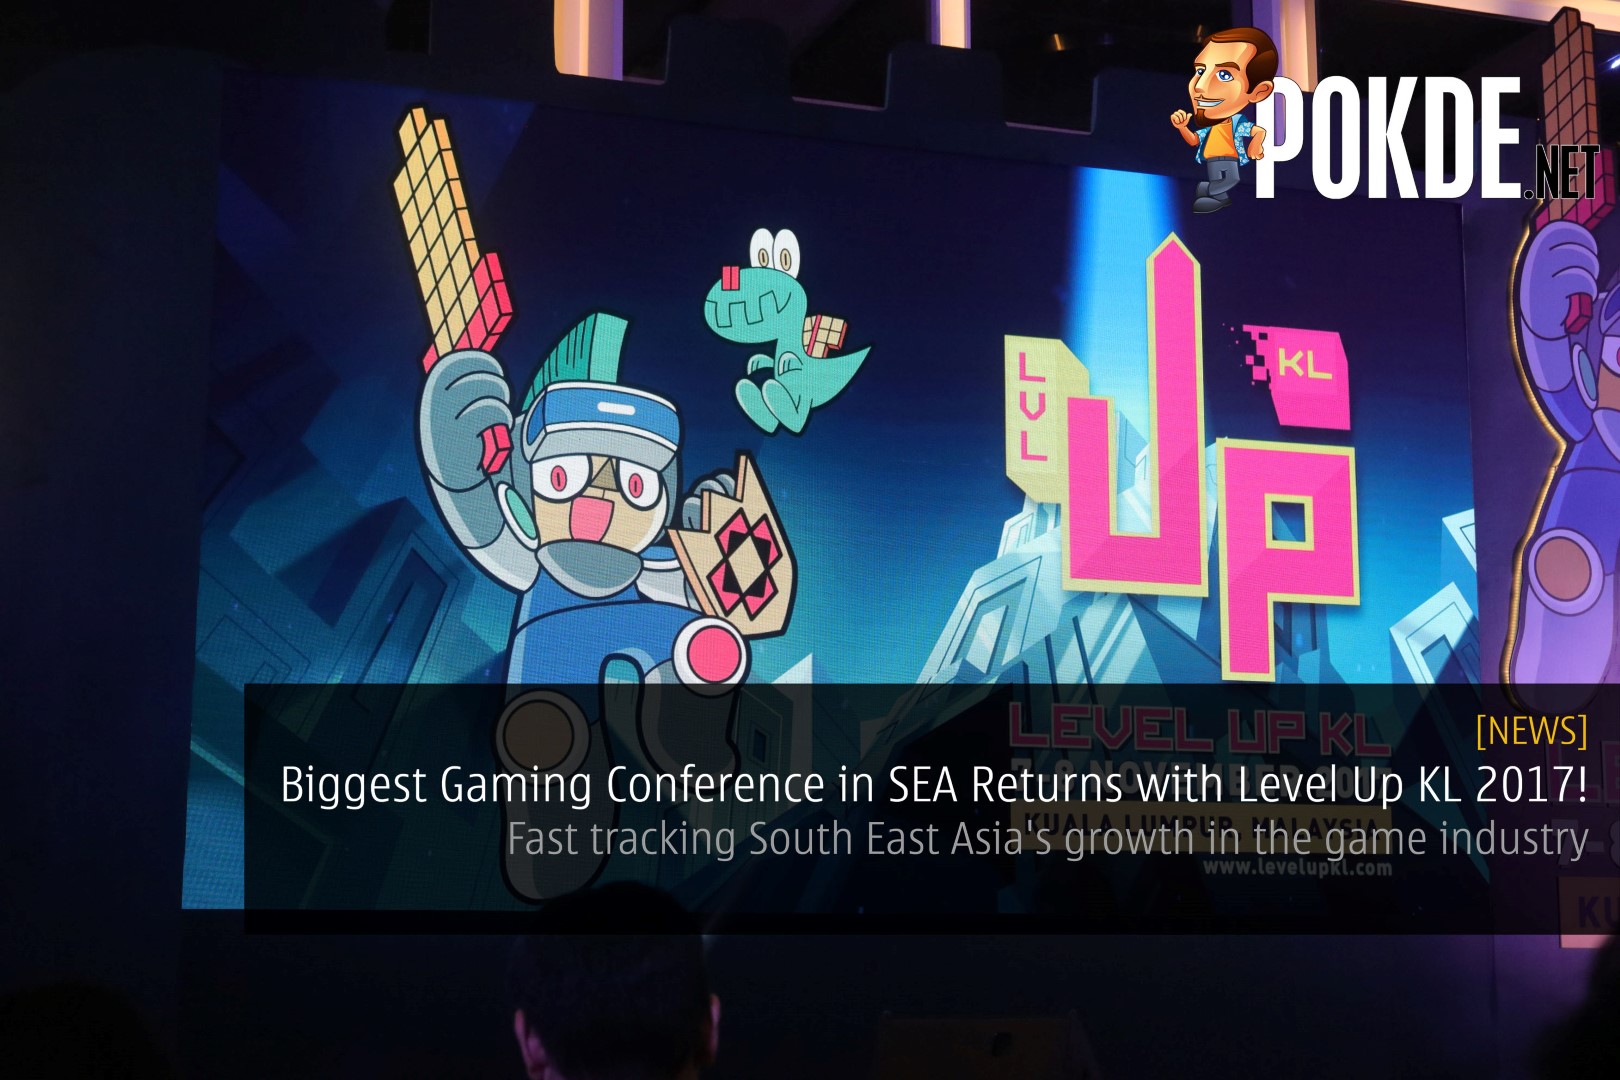 Biggest Gaming Conference in SEA Returns with Level Up KL 2017! - Fast tracking South East Asia's growth in the game industry 30